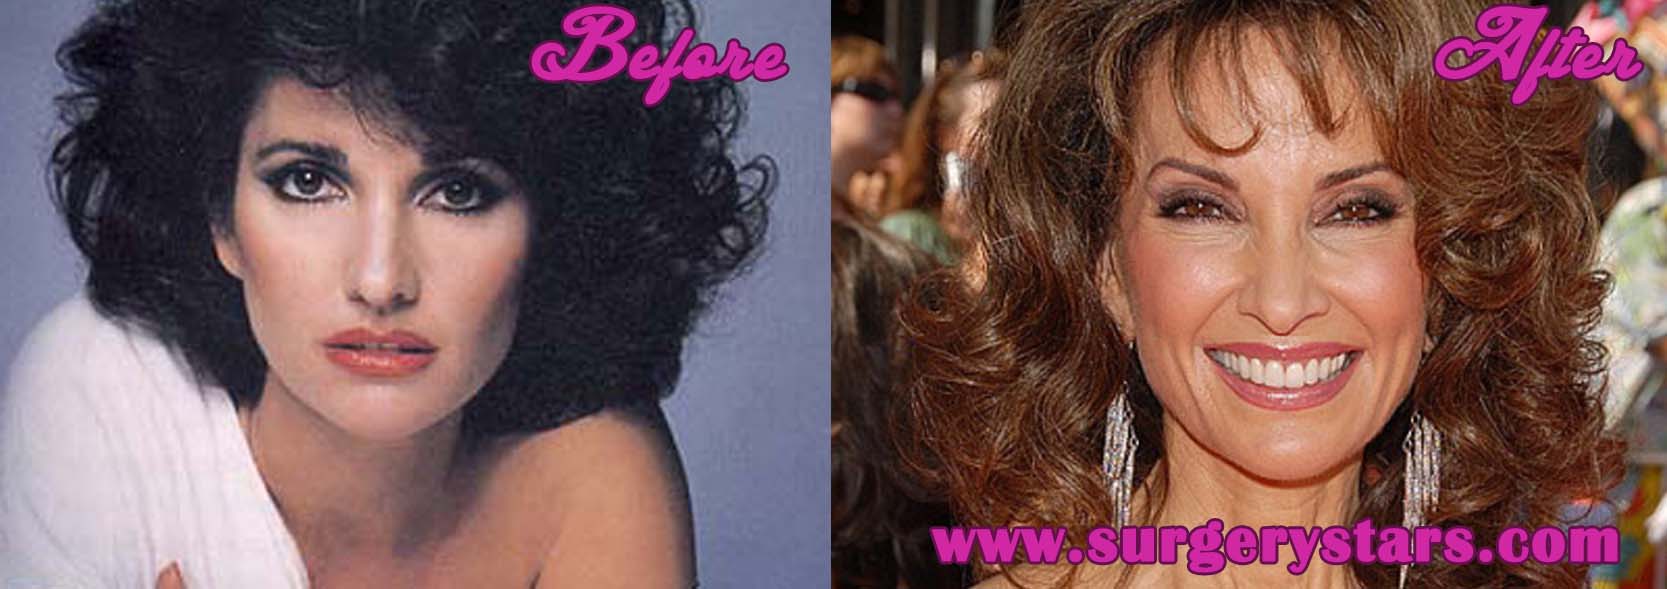 Susan Lucci Plastic Surgery - Before and After Pictures.